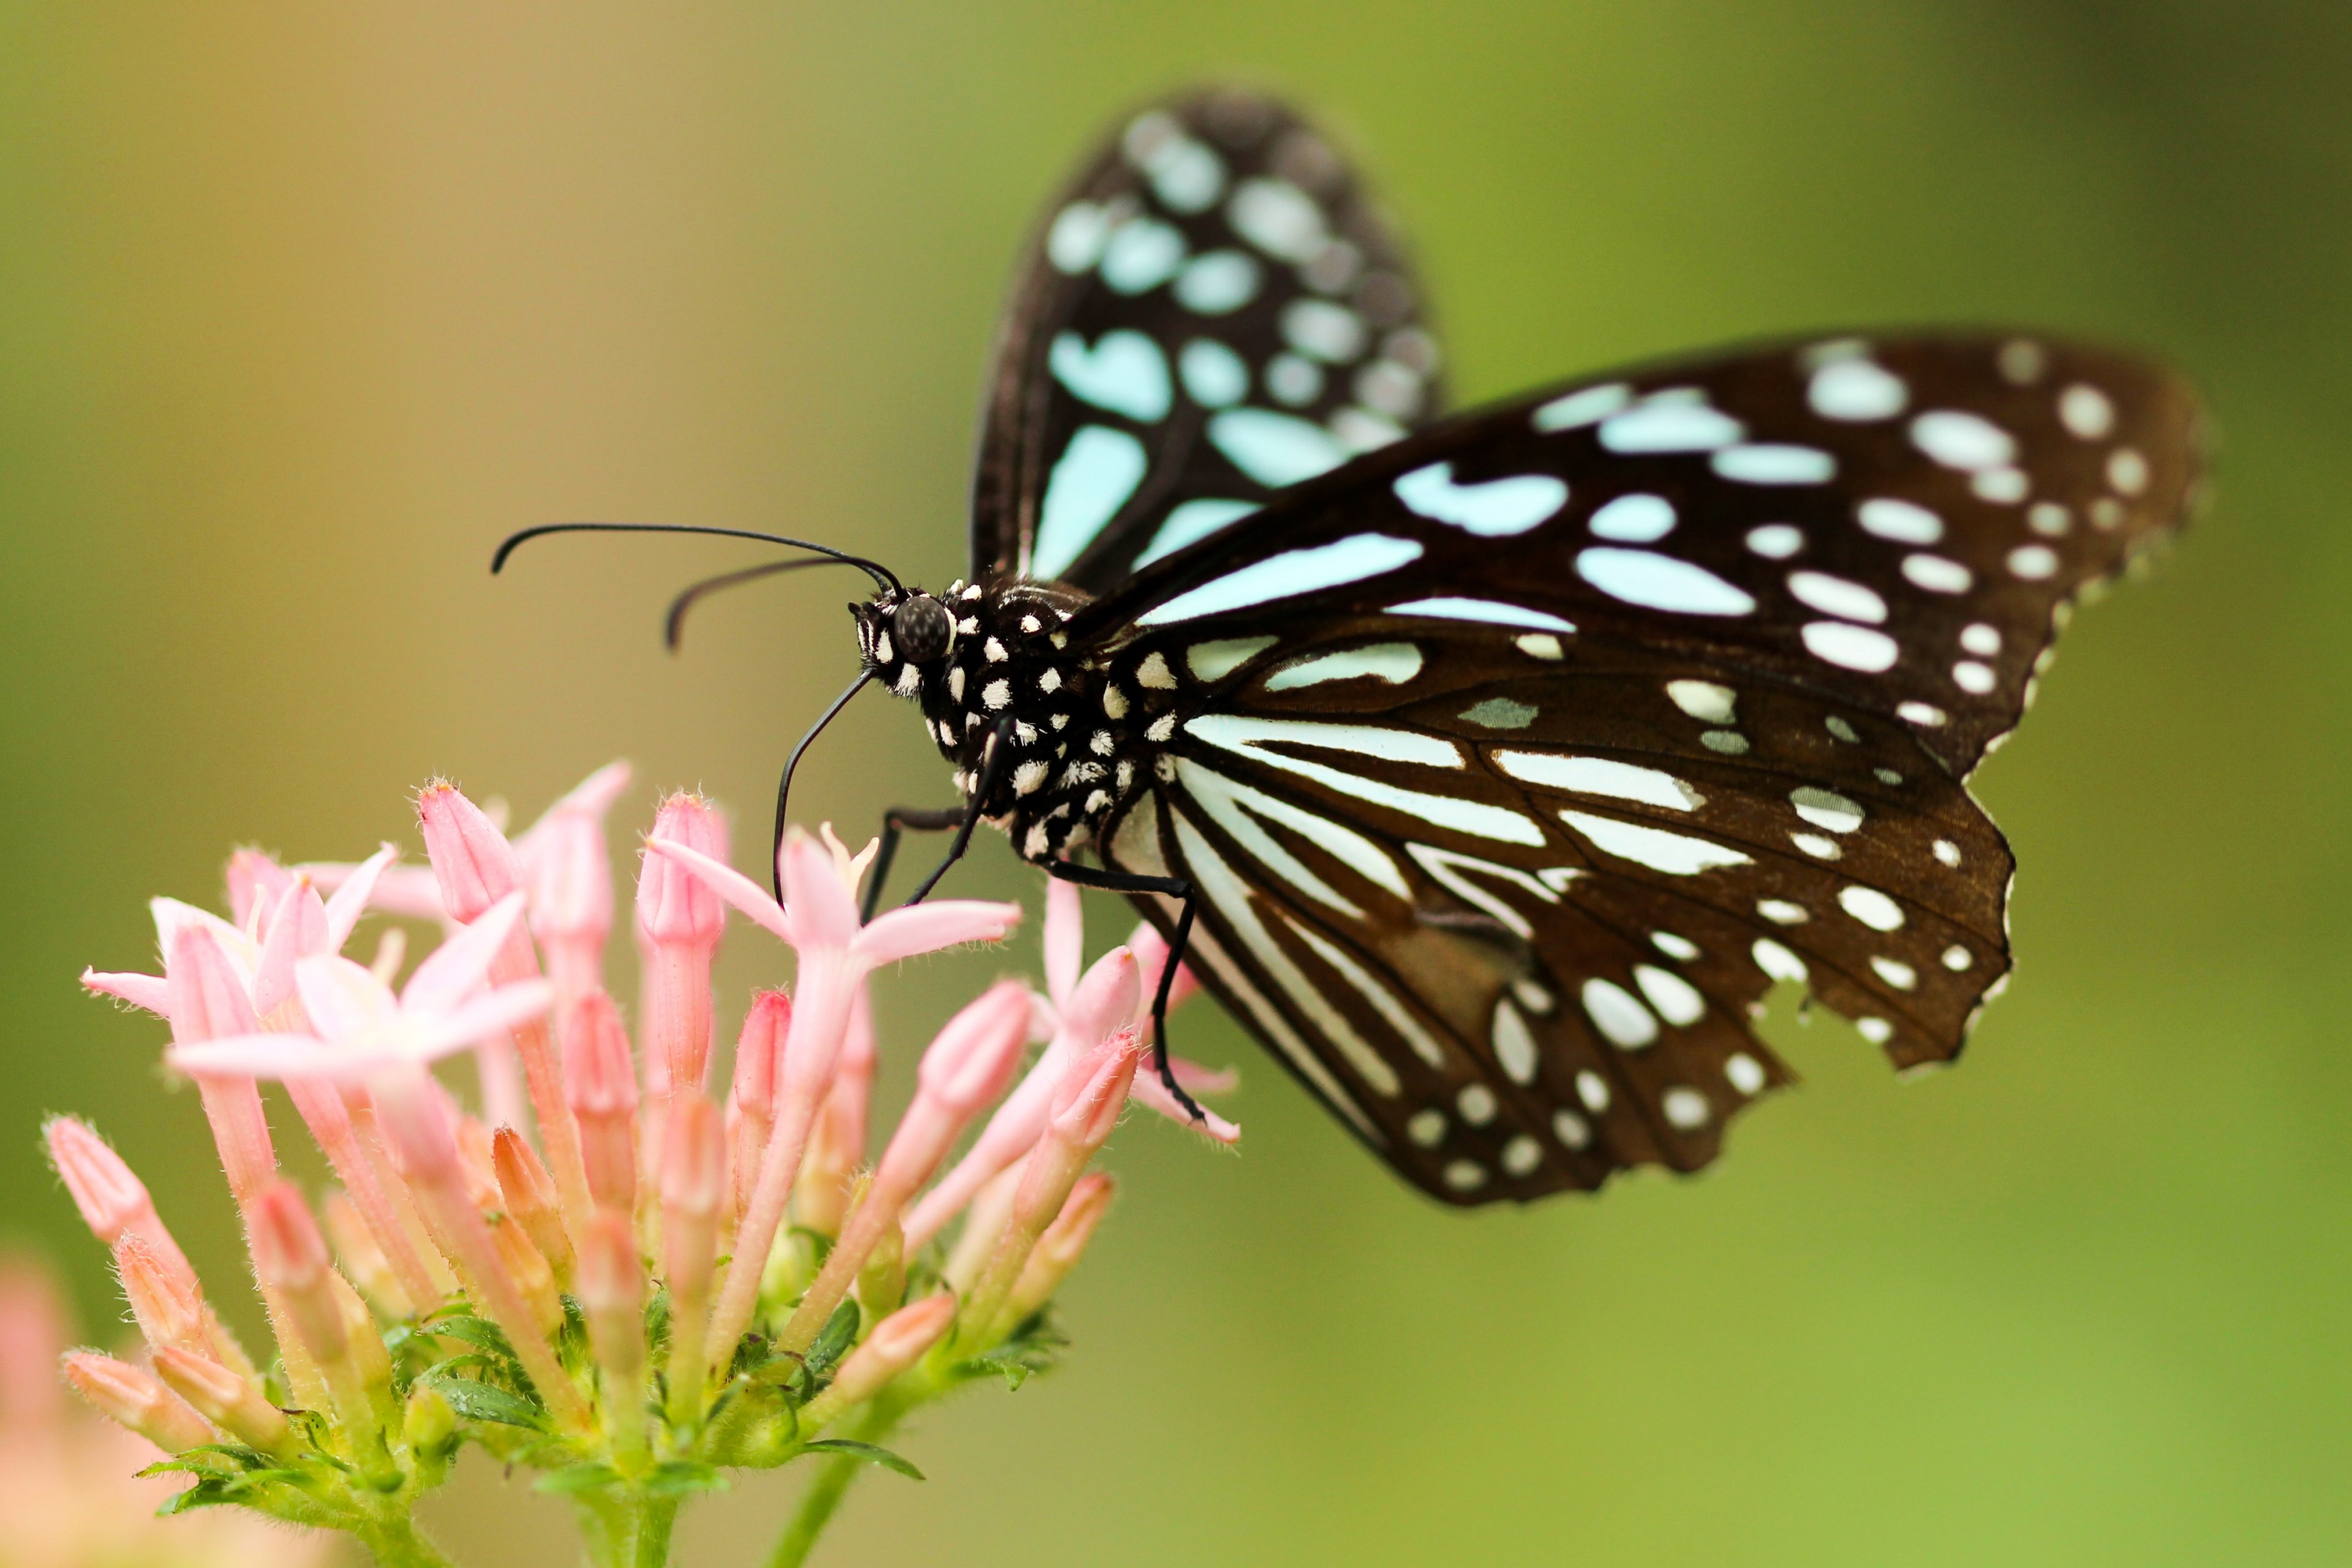 #3840x2560 A Black And White Butterfly On A Pink Flower - Monarch Butterfly , HD Wallpaper & Backgrounds